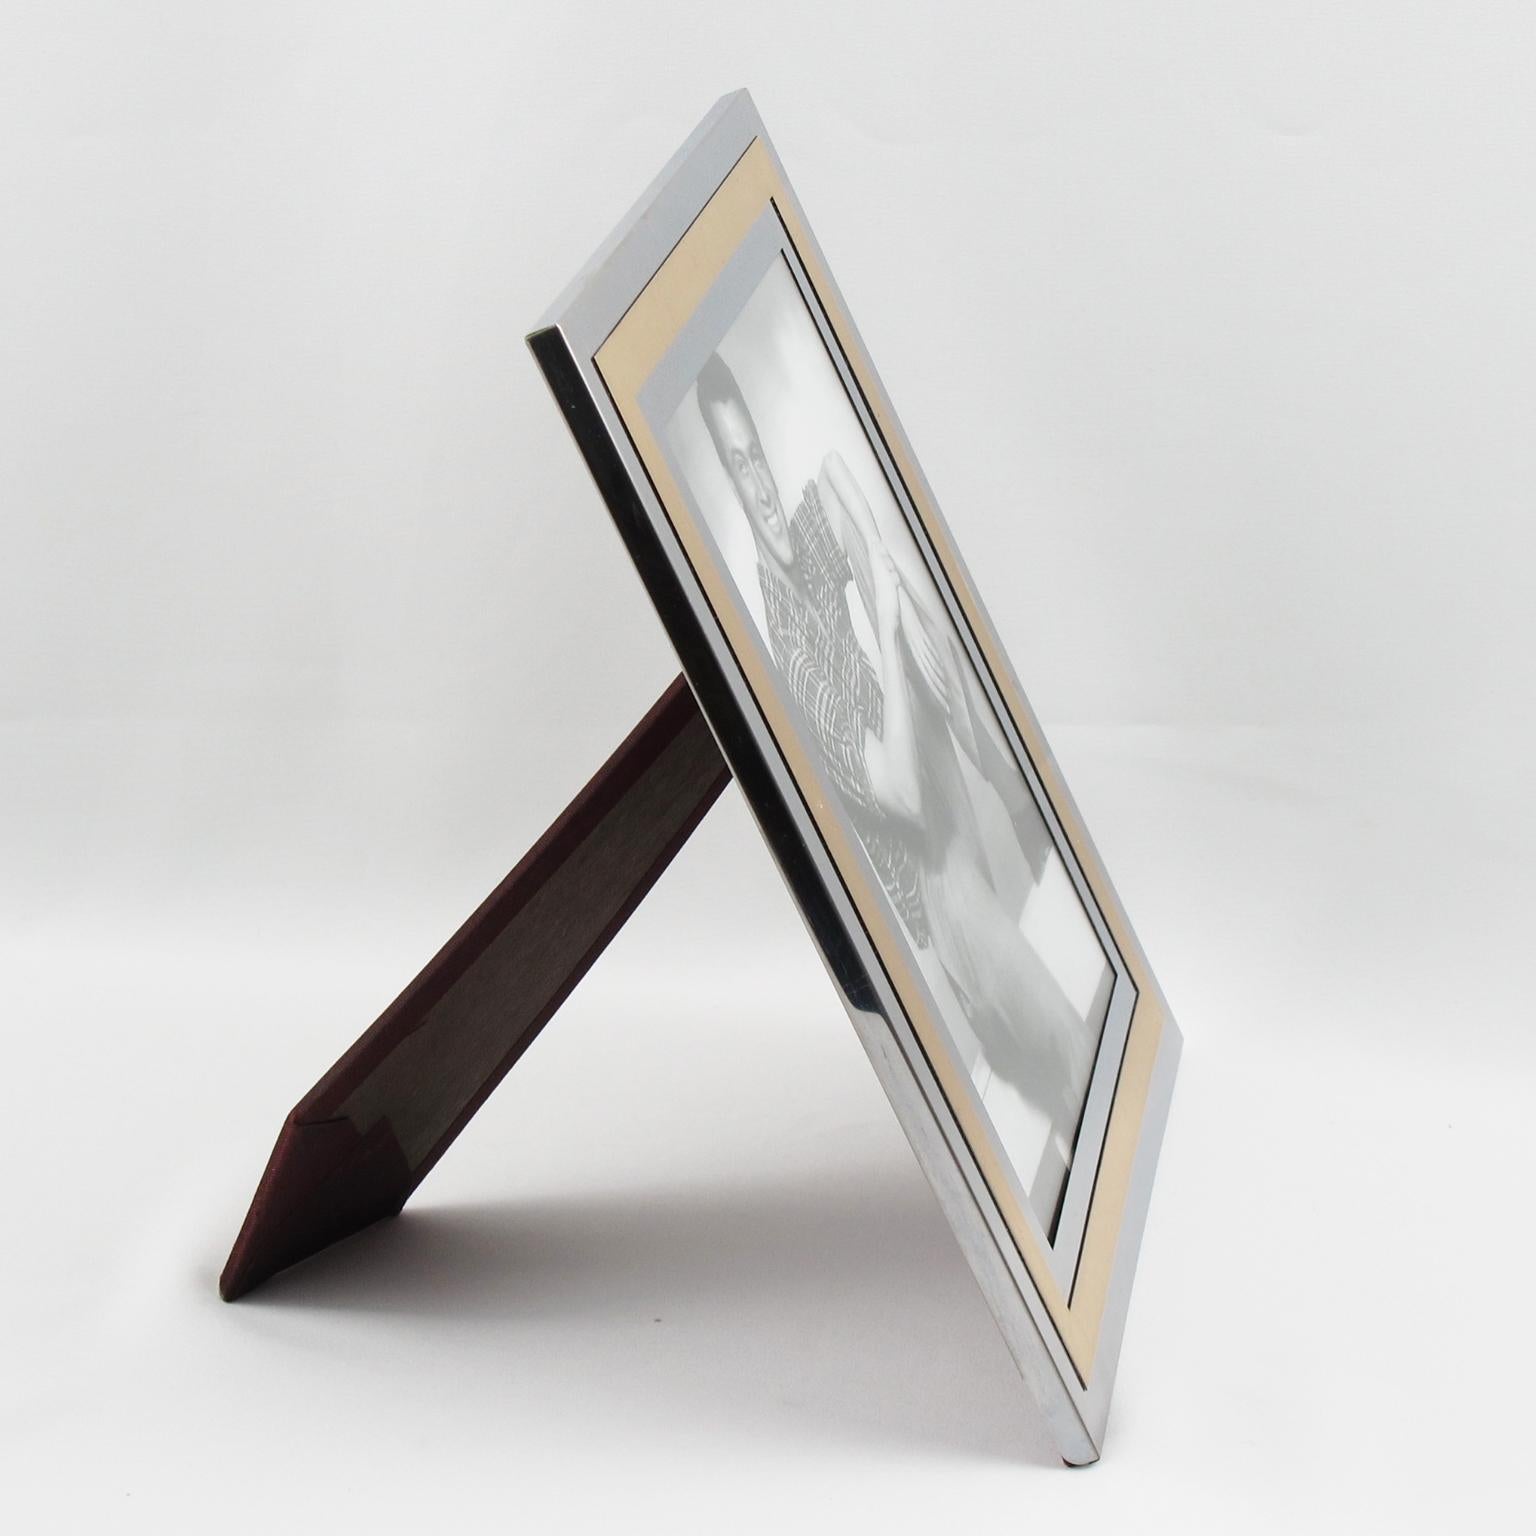 Elegant 1970s modernist picture photo frame by Italian designer Noel B.C. Gilt brass and chrome metal geometric design. Silver and gold color. Back and easel in dark red fabric. The frame can also be hanged on a wall. Picture frame can be placed in